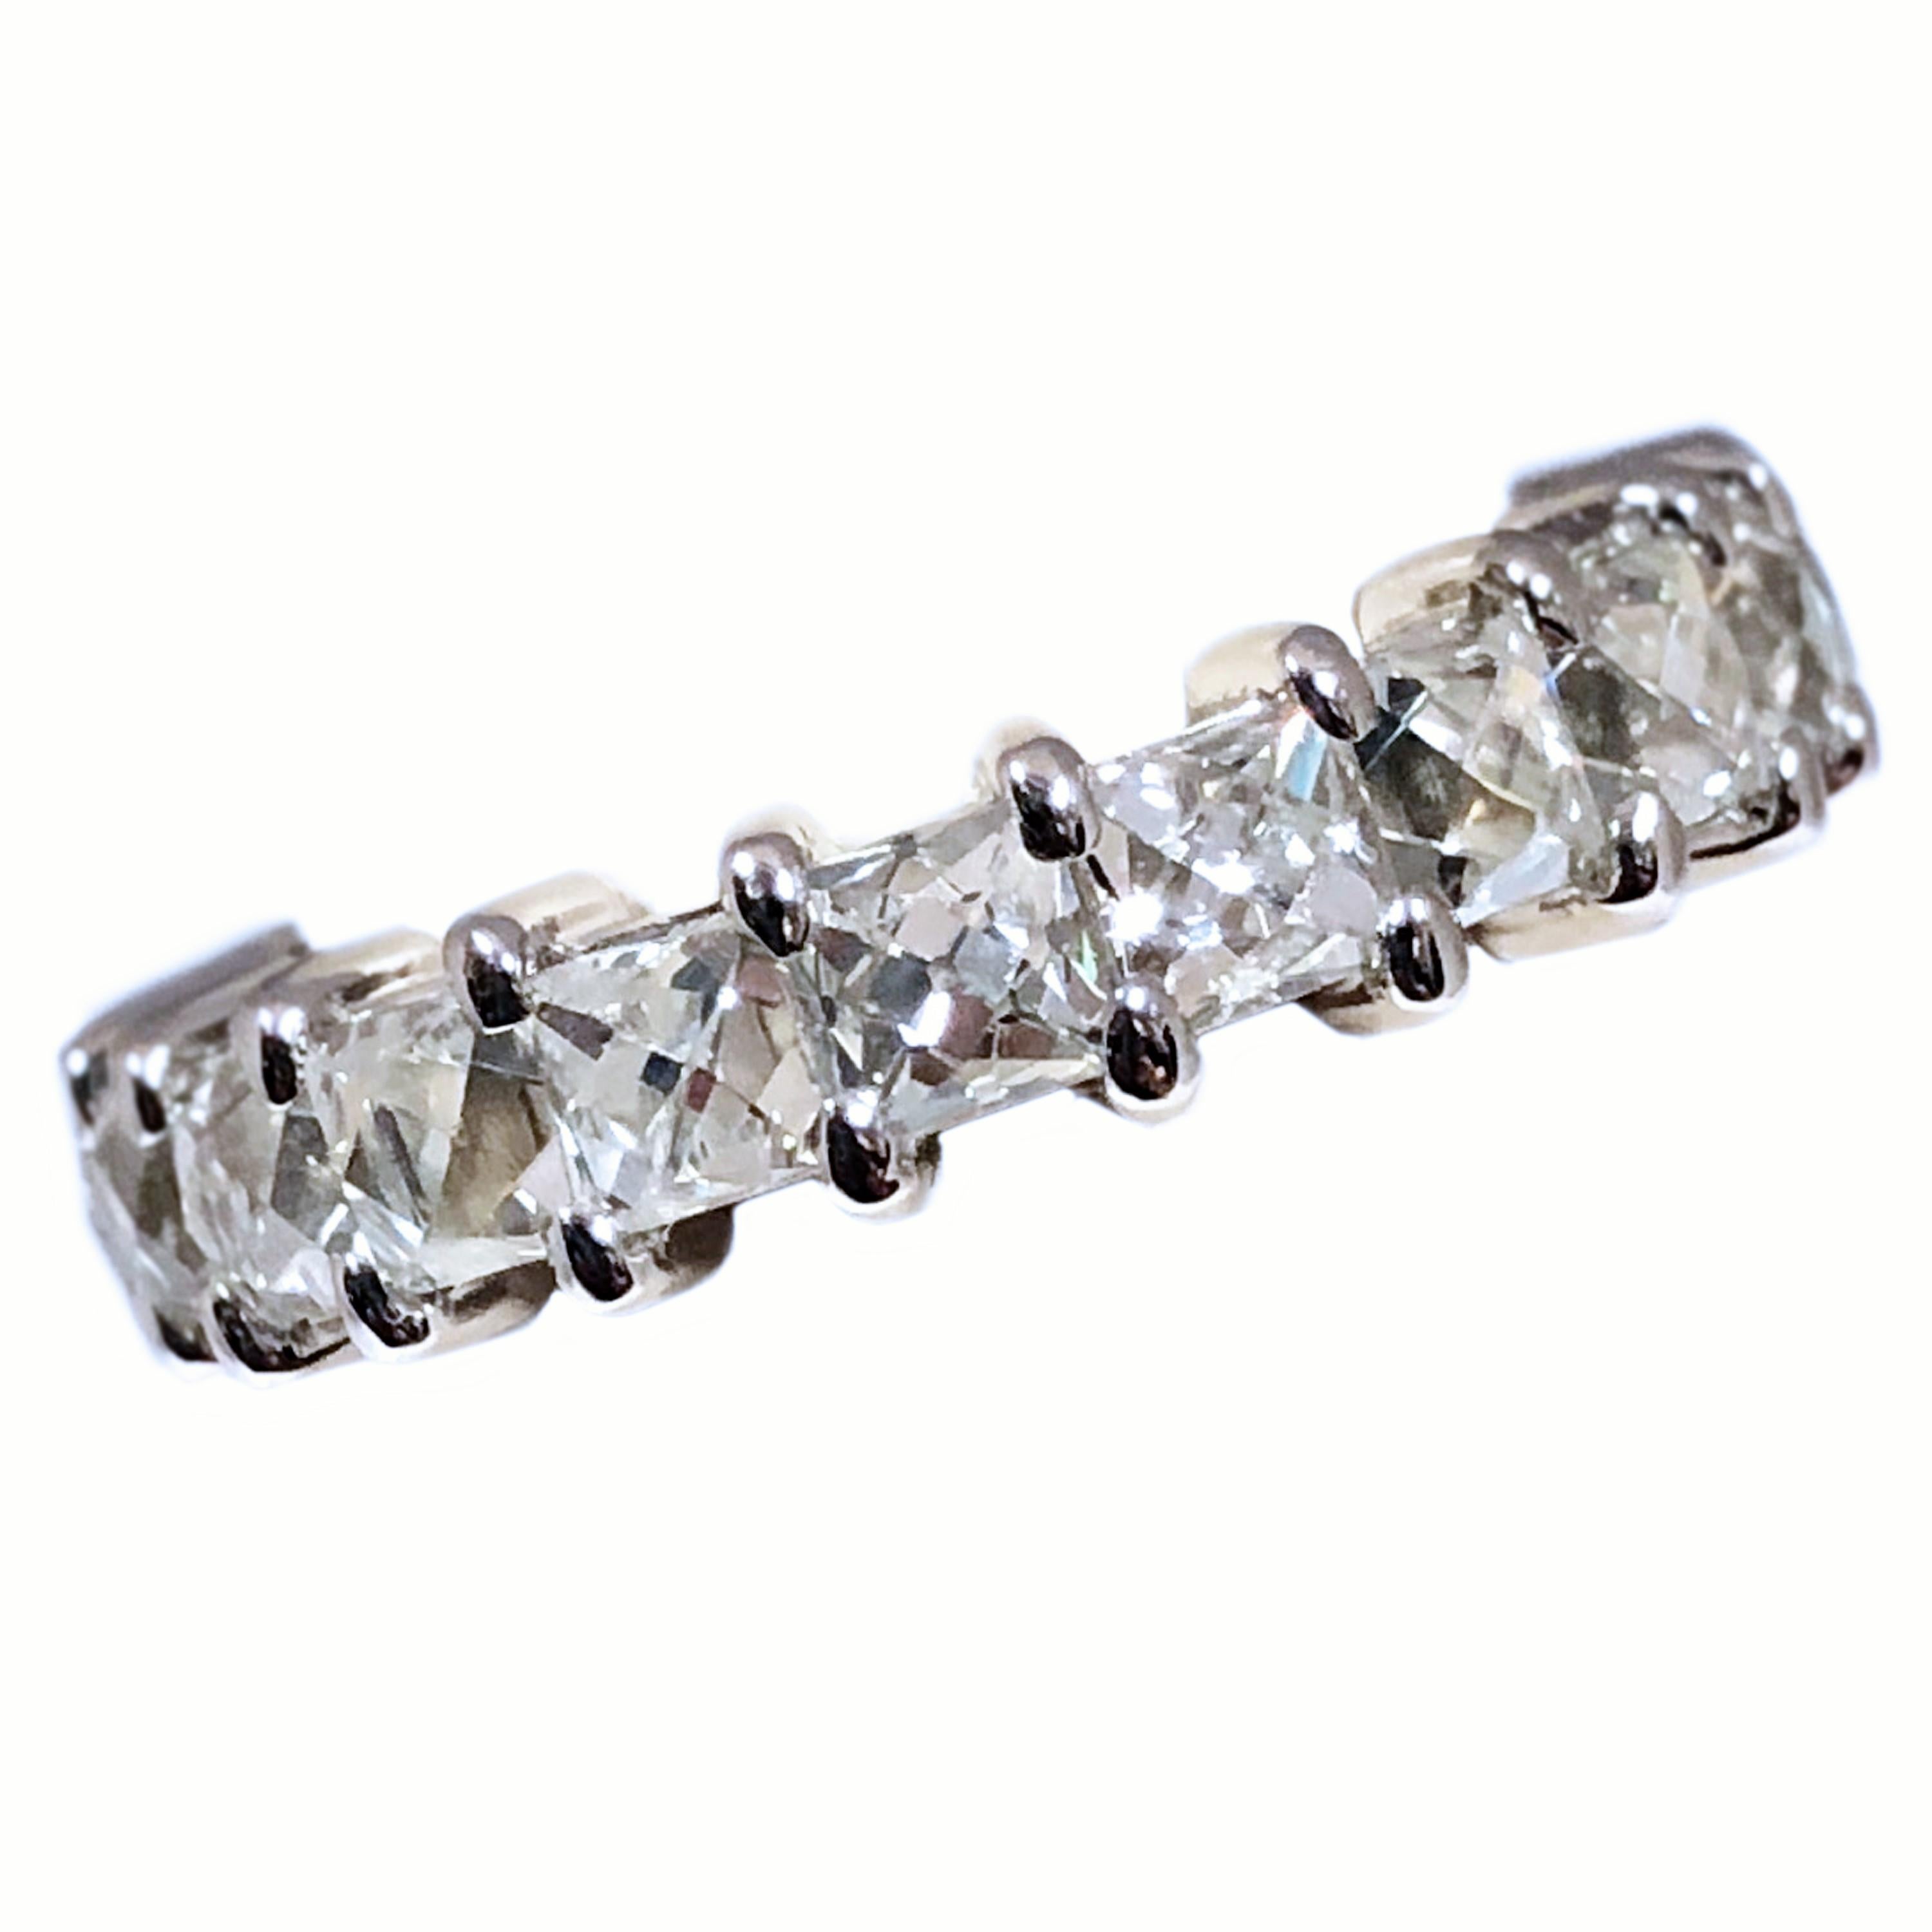 Platinum Eternity Band ring set with French cut Diamonds, each French cut Diamond measures 3 X 3 MM with a total of 20 stones set in this band totaling 5.19 Carats. The stones grade as H in color and VS in Clarity, the Ring measures 4.5 MM wide,